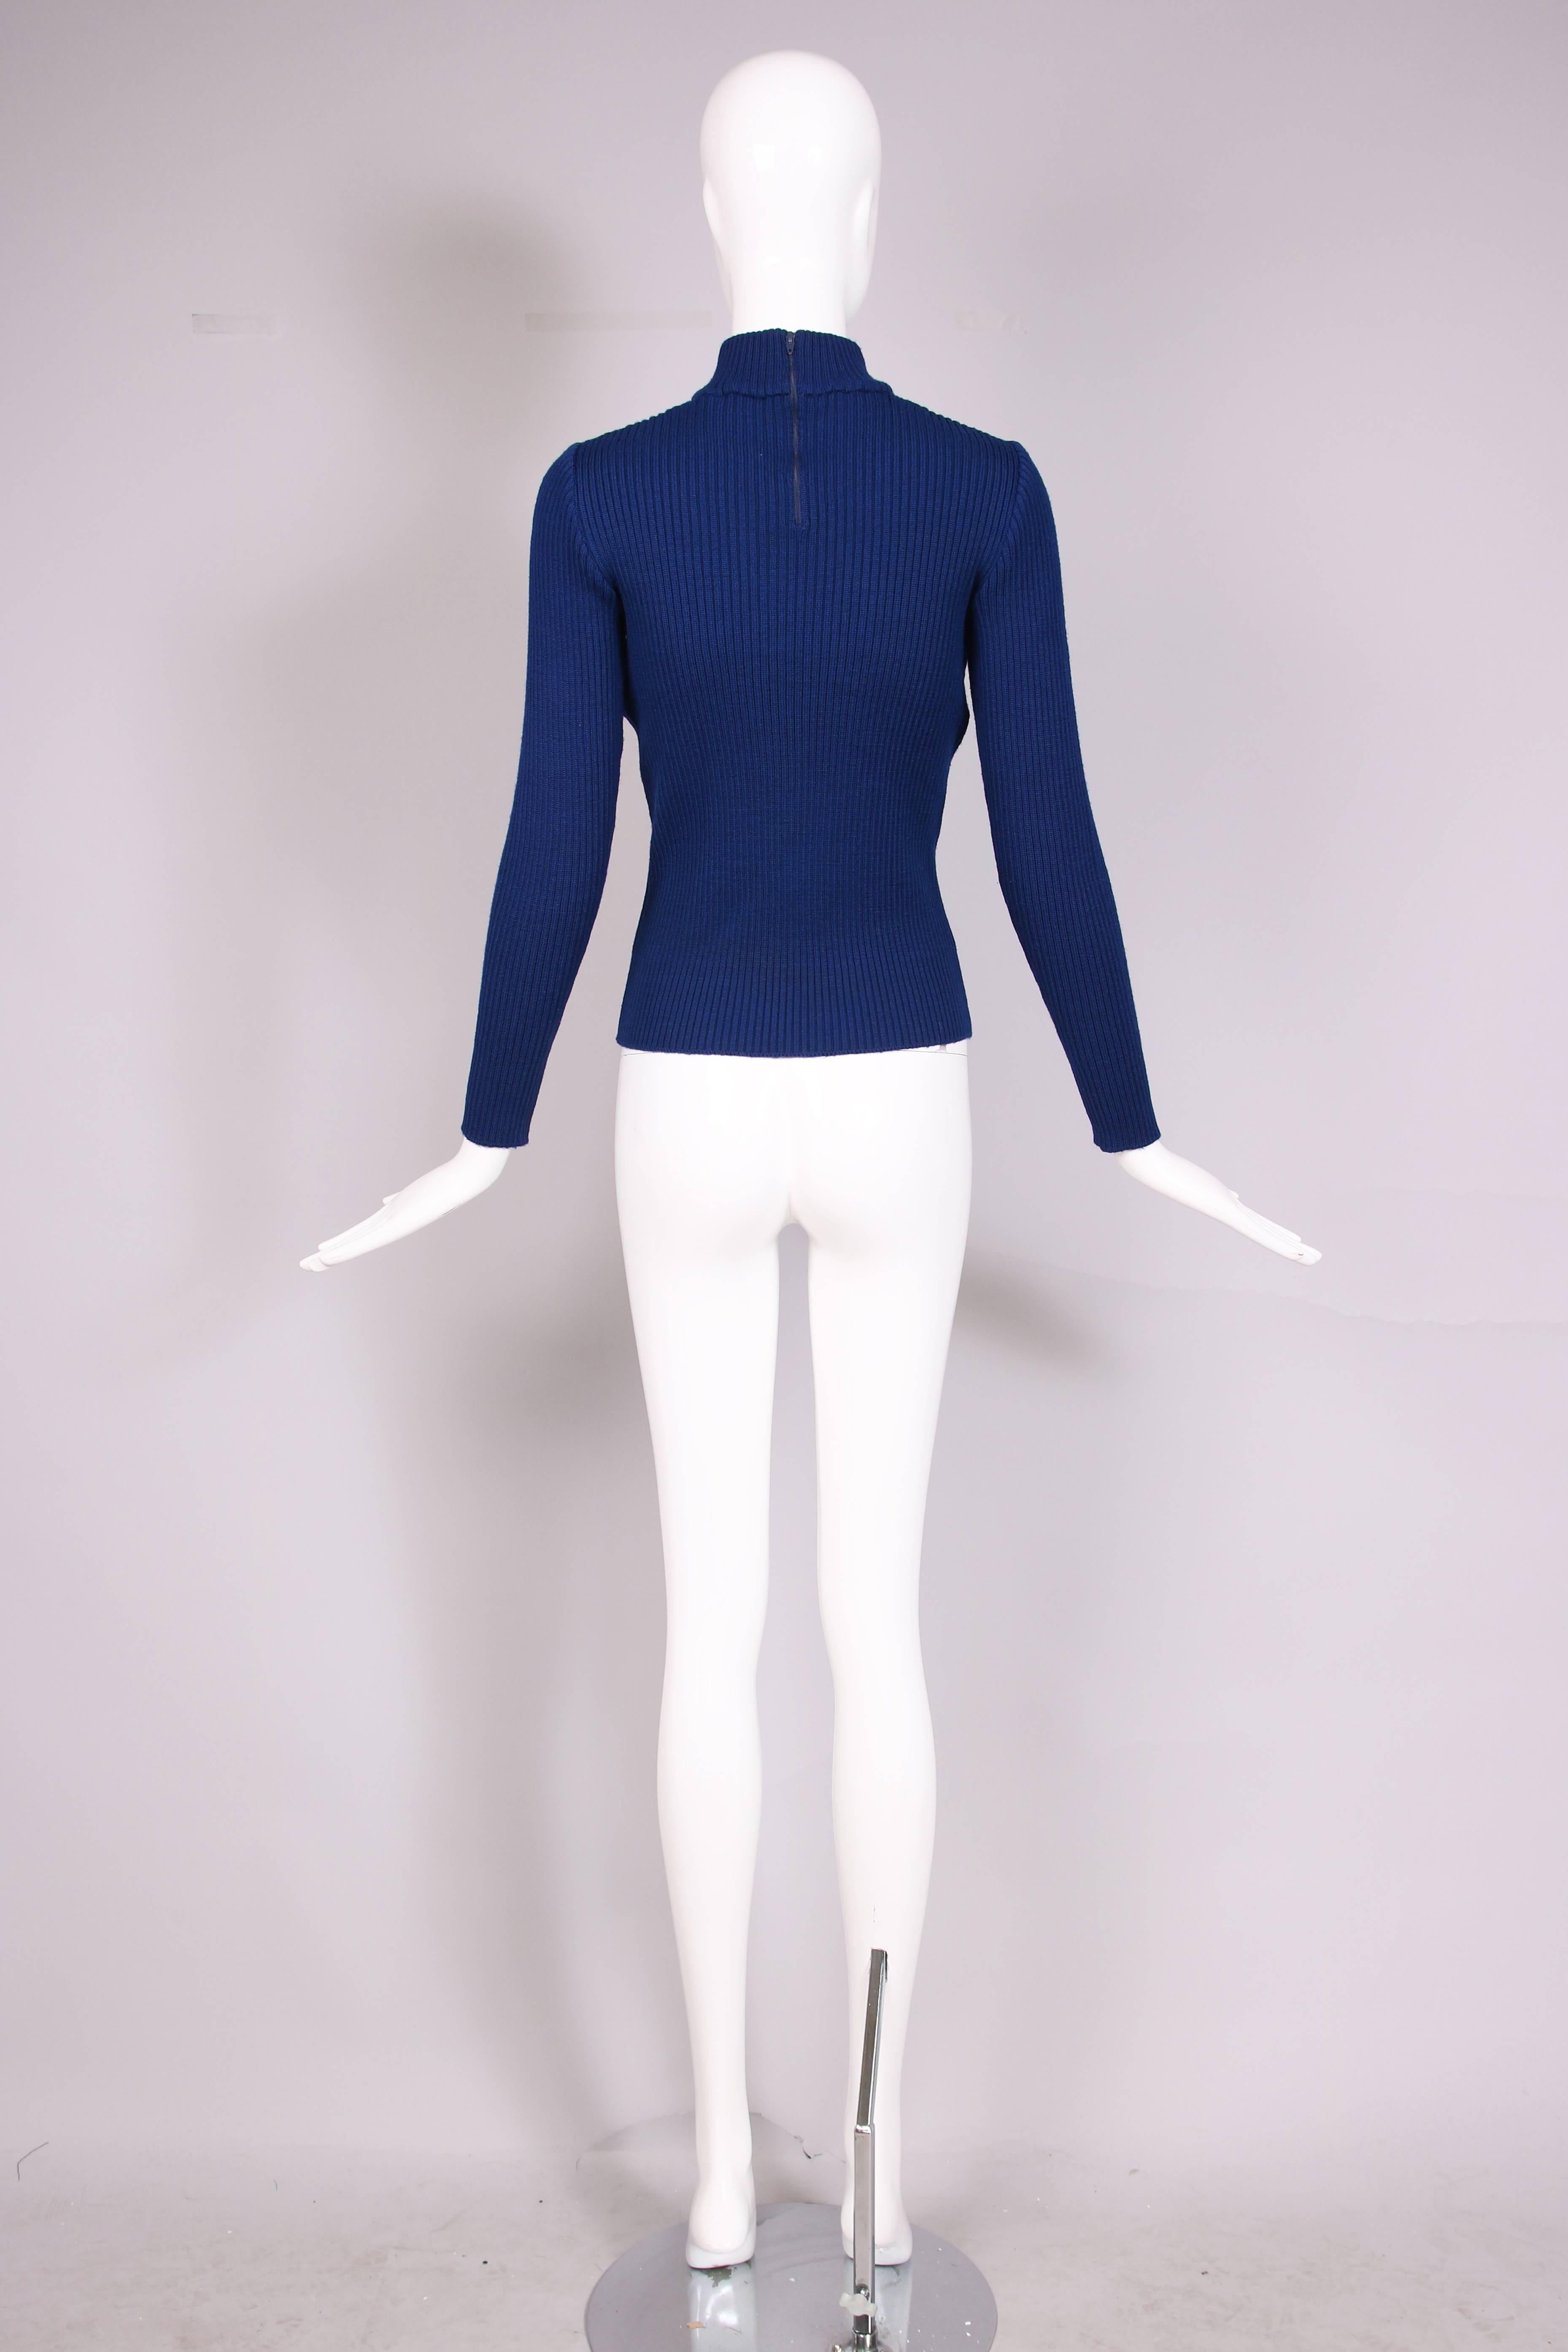 1970's Gucci Blue Mock Turtle Neck Sweater w/Suede Weave In Excellent Condition For Sale In Studio City, CA